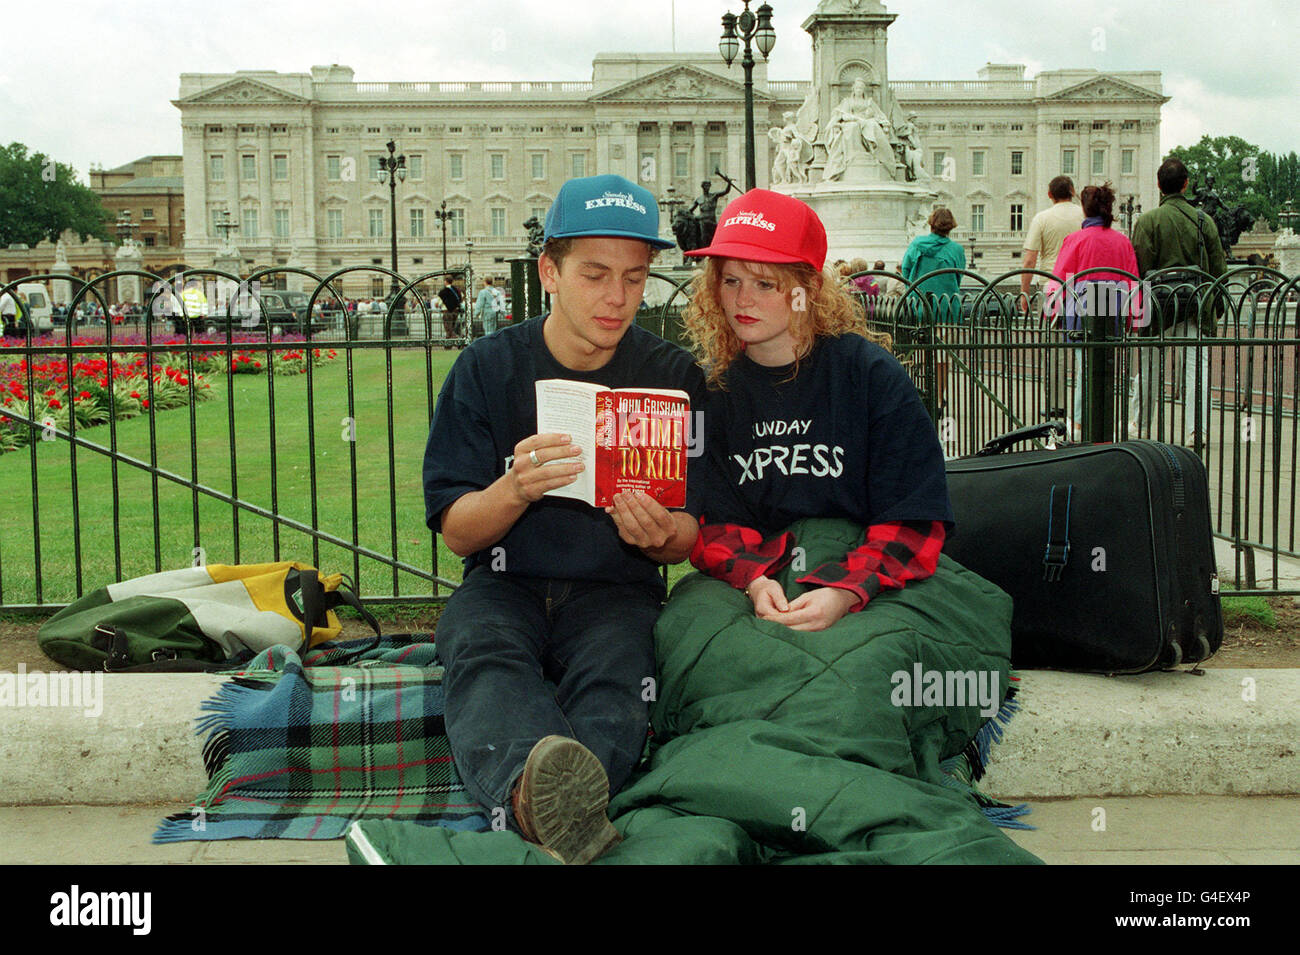 PA NEWS PHOTO 5/8/93  RICHARD SIMPSON FROM KENT AND PAMELA ELLIS FROM WIGAN MAKE SURE THEY ARE FIRST IN THE QUEUE TO VISIT BUCKINGHAM PALACE WHEN IT IS TO OPEN TO THE PUBLIC Stock Photo